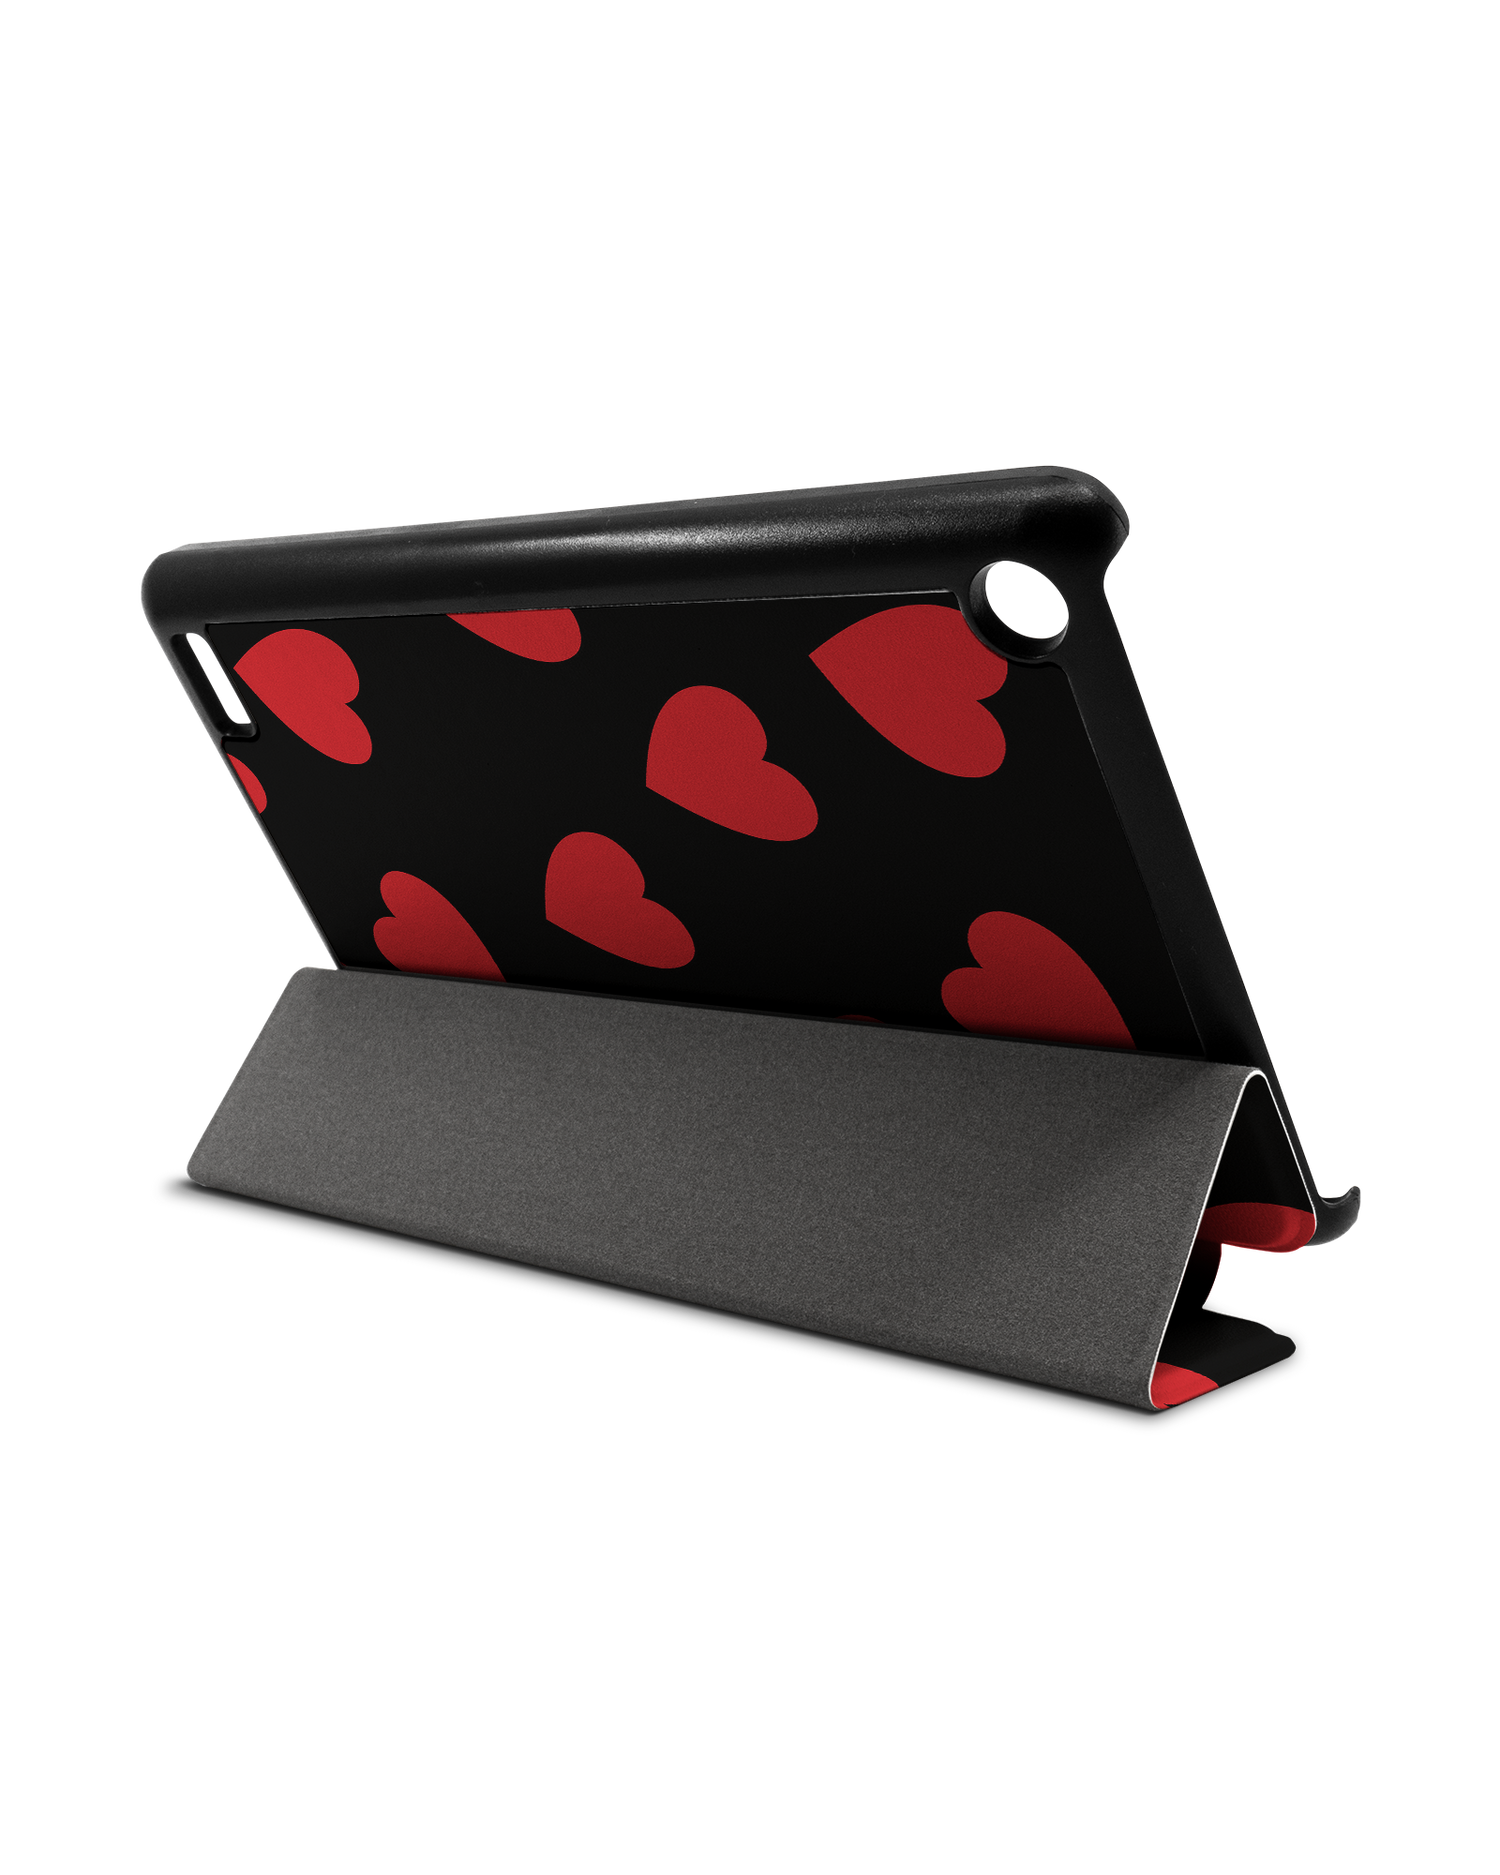 Repeating Hearts Tablet Smart Case for Amazon Fire 7: Used as Stand